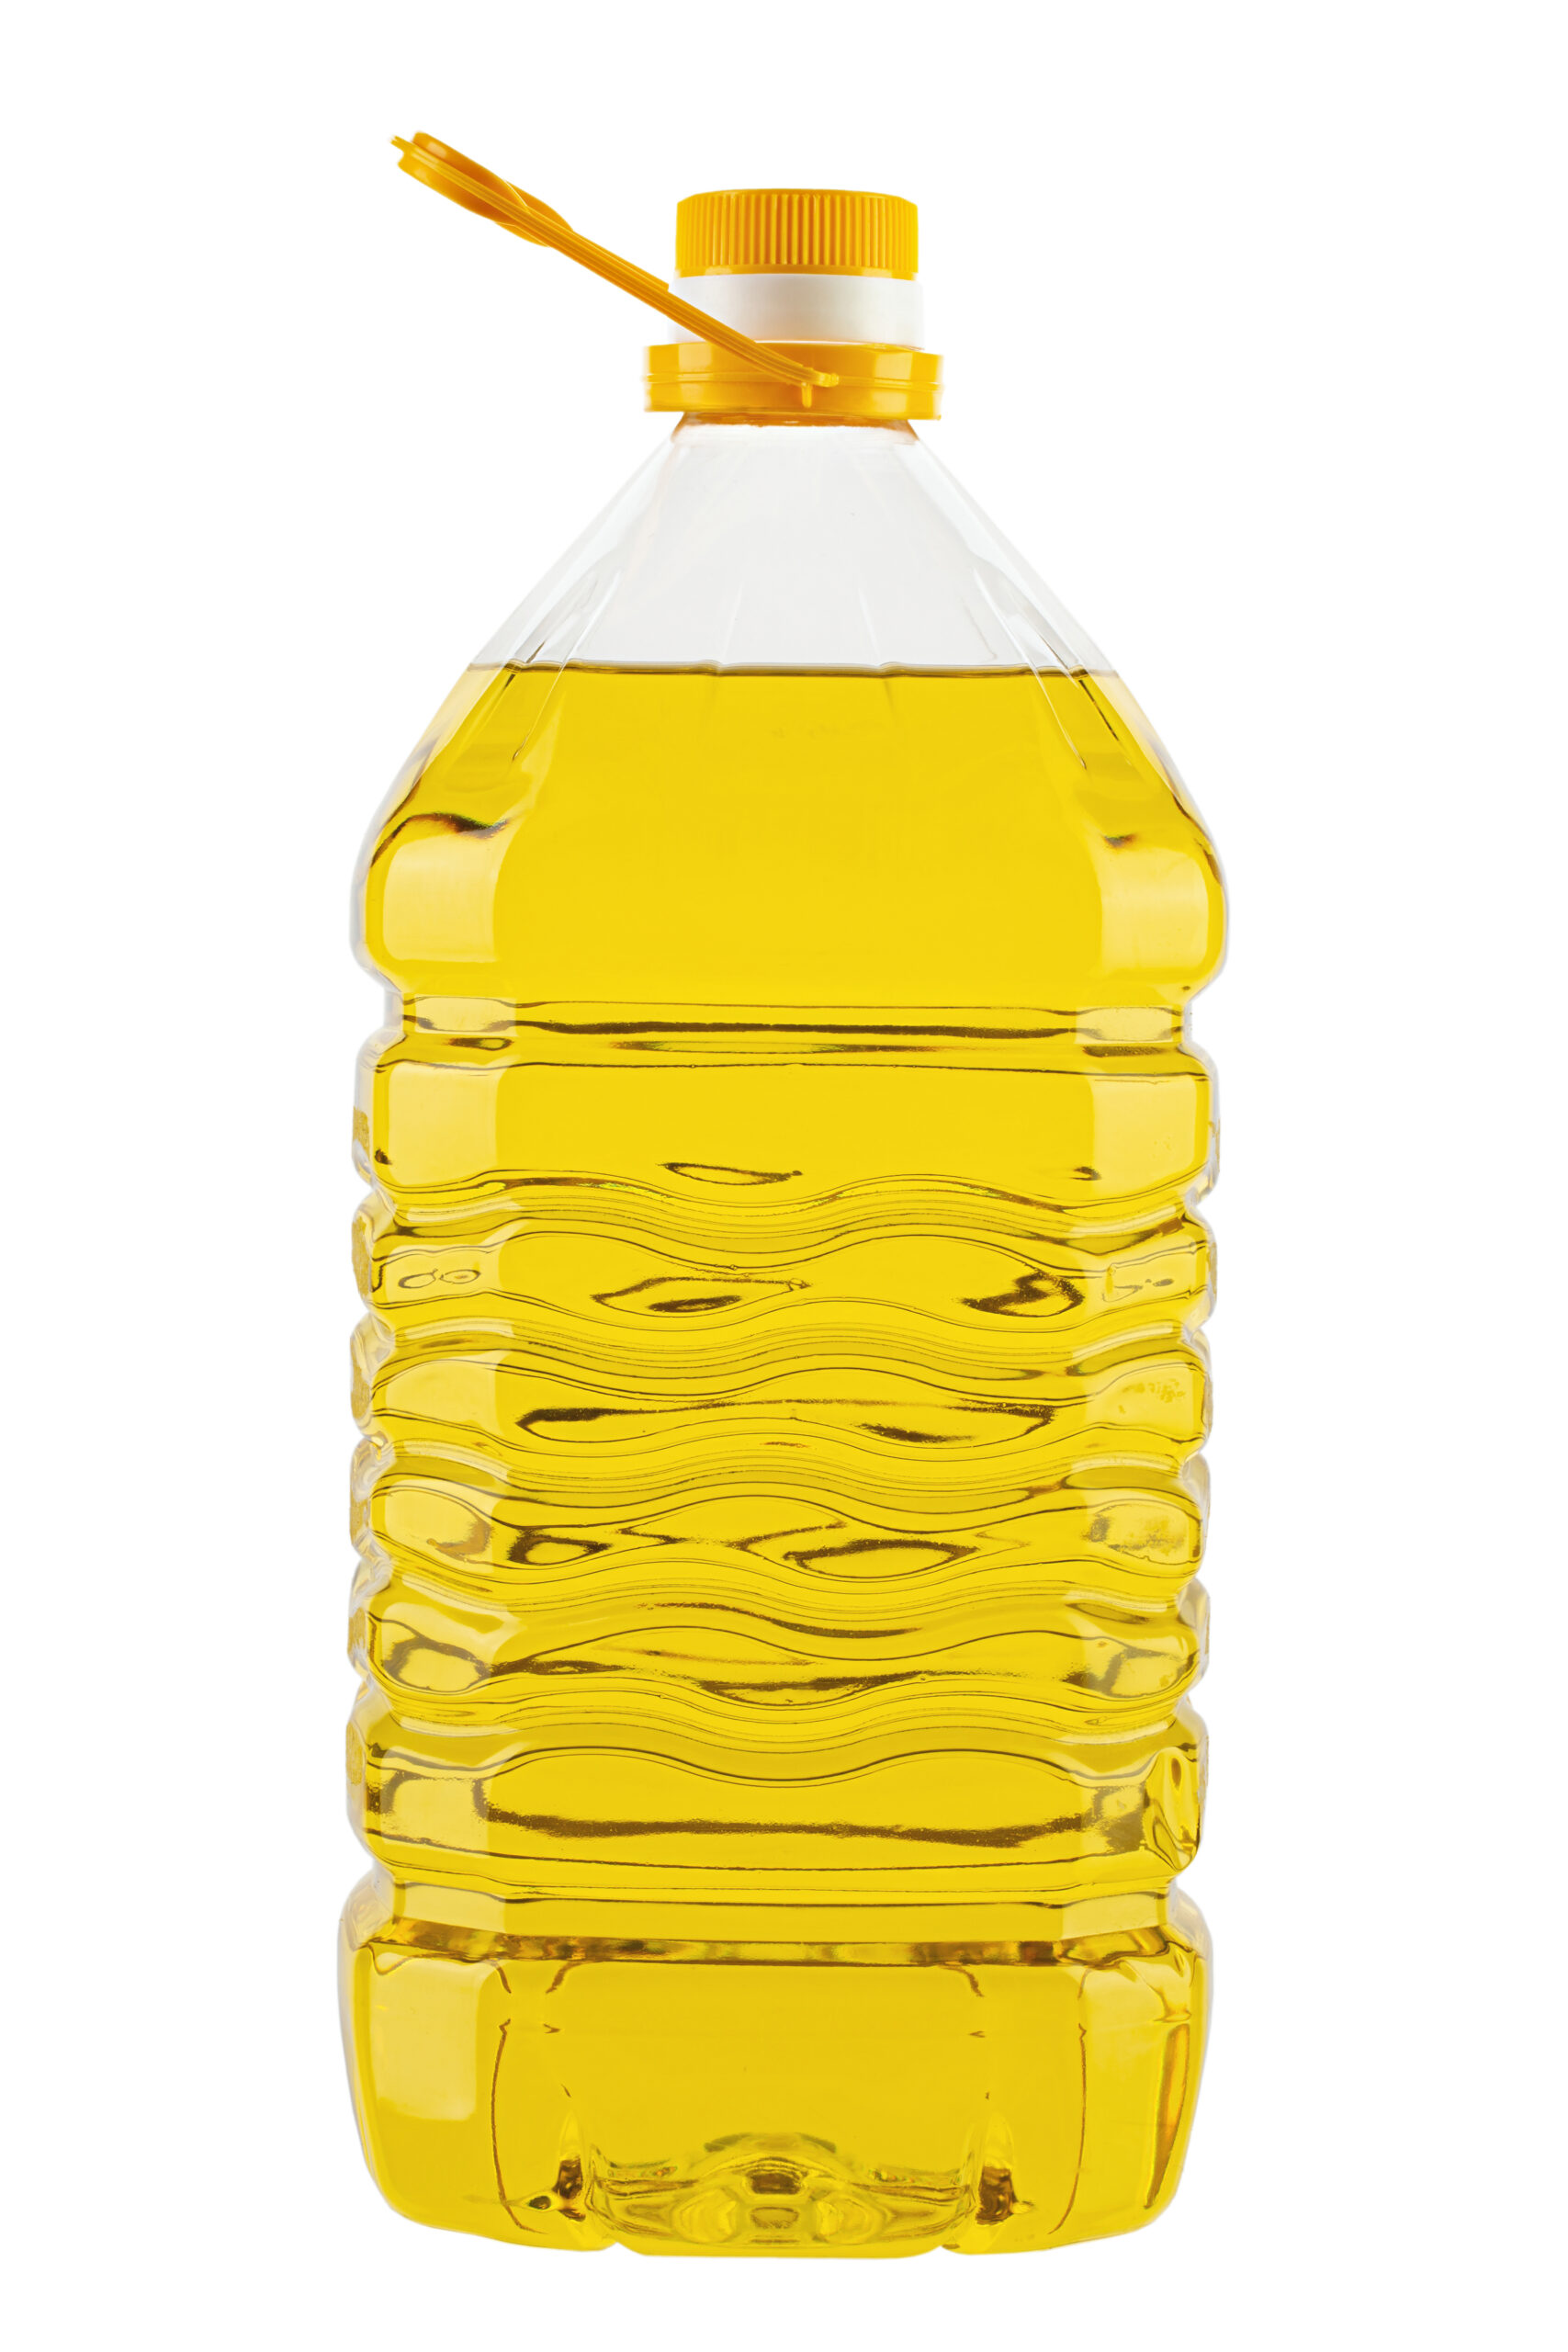 Large bottle of sunflower oil with a handle isolated on white background. File contains clipping path.